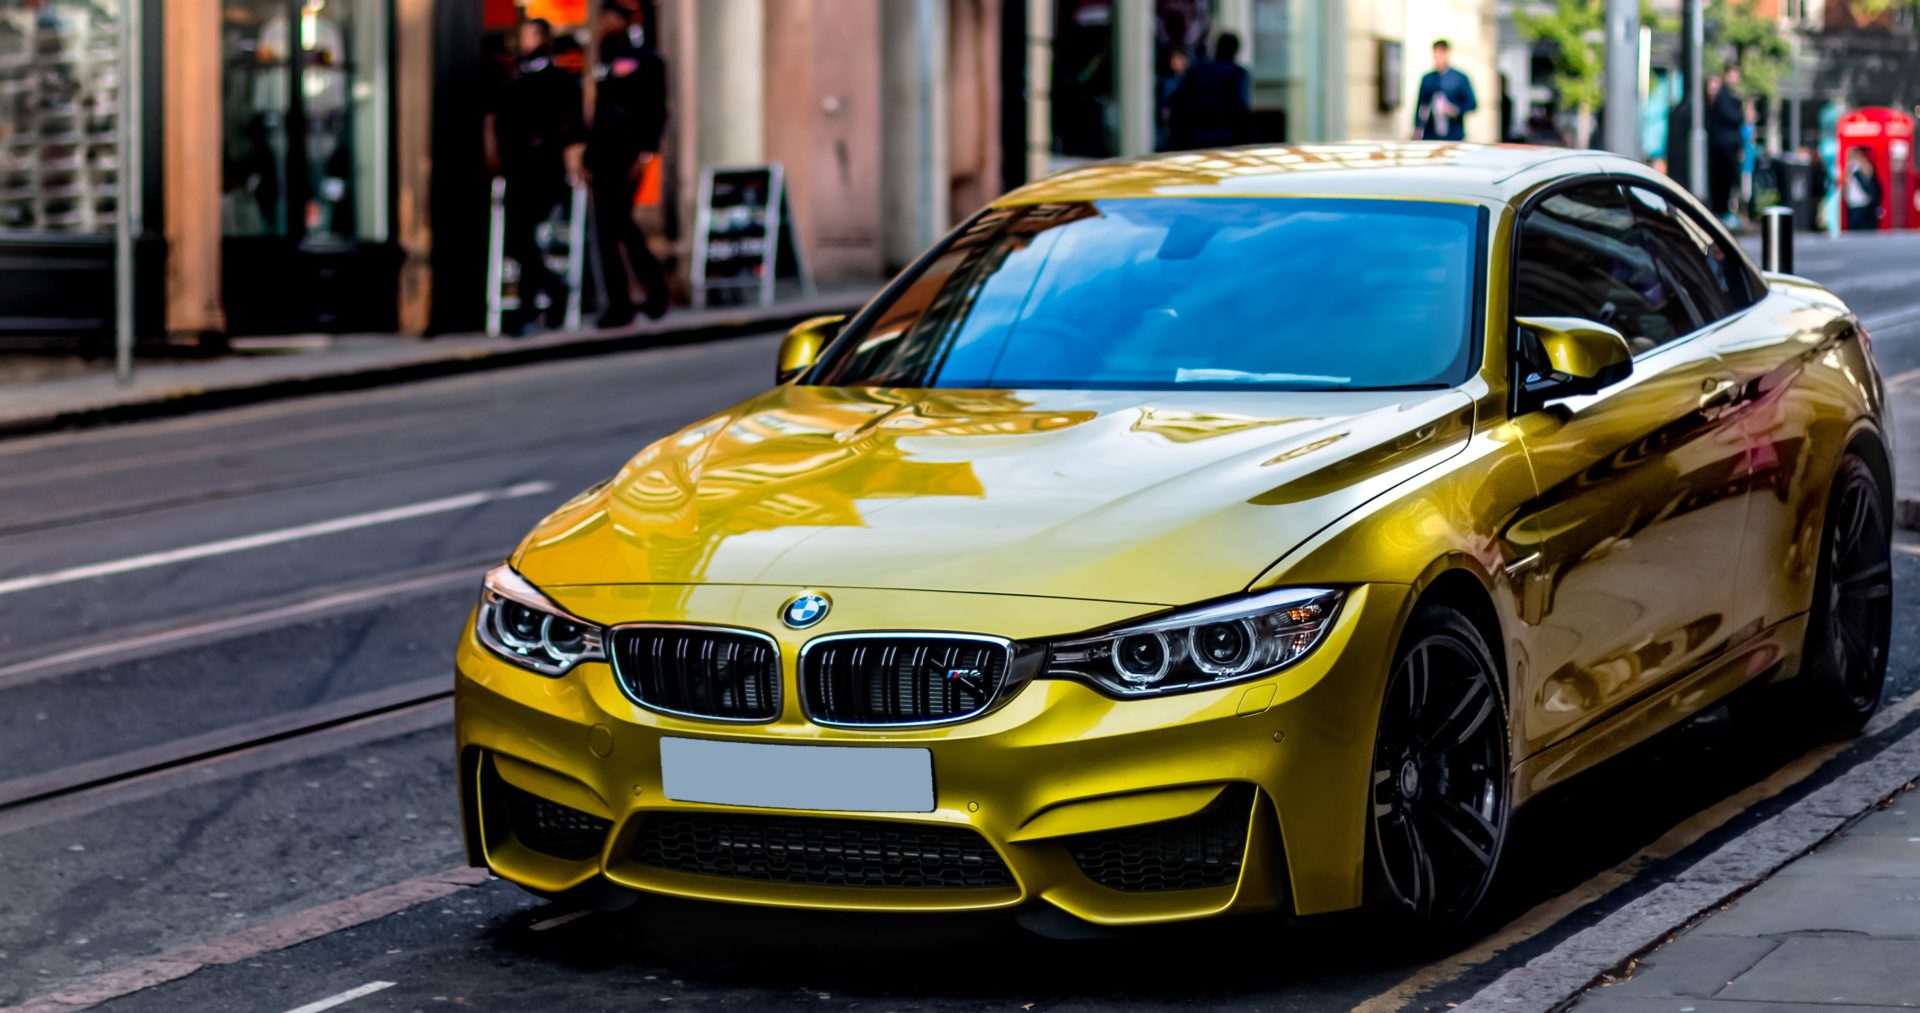 A yellow BMW M4 is parked on a city street.